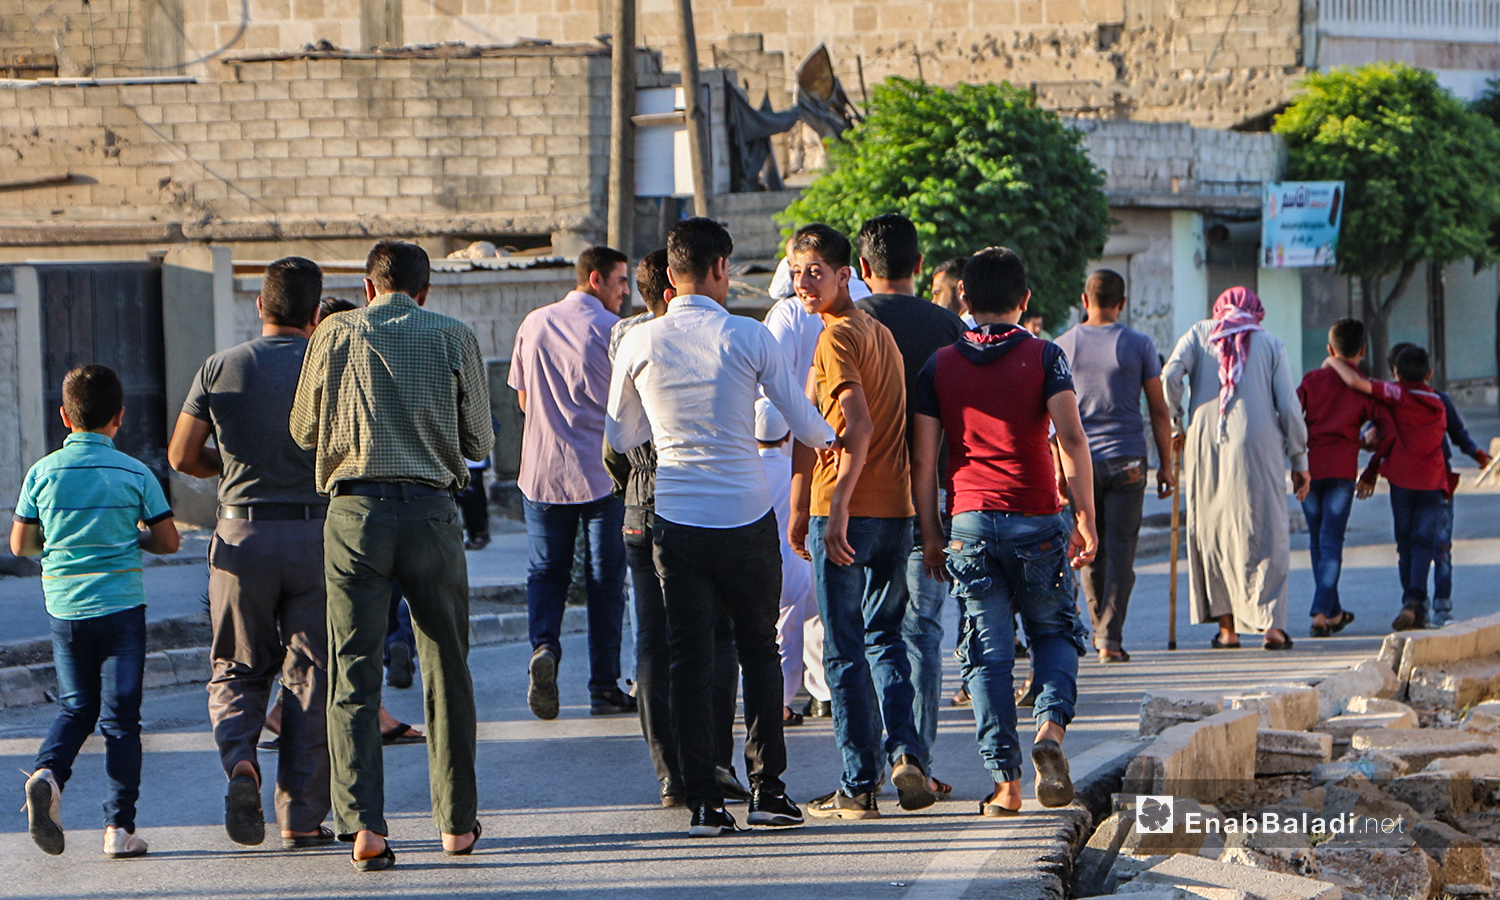 People exiting  a mosque after the end of the Eid al-Adha prayer in Dabiq town in northern Aleppo countryside – 31 July 2020 (Enab Baladi / Abdul Salam Majan)